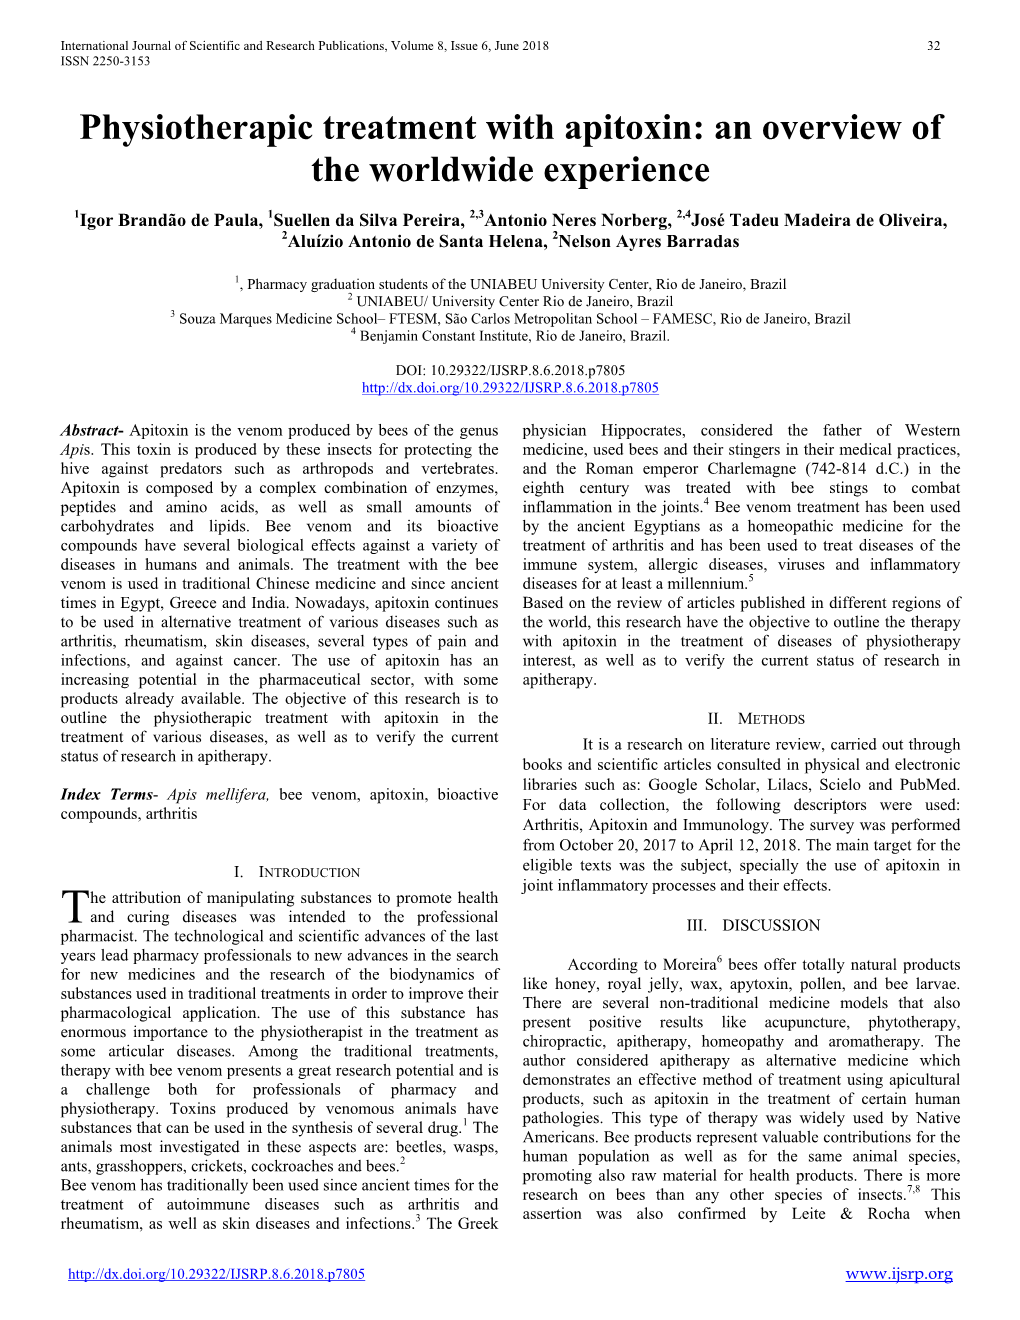 Physiotherapic Treatment with Apitoxin: an Overview of the Worldwide Experience